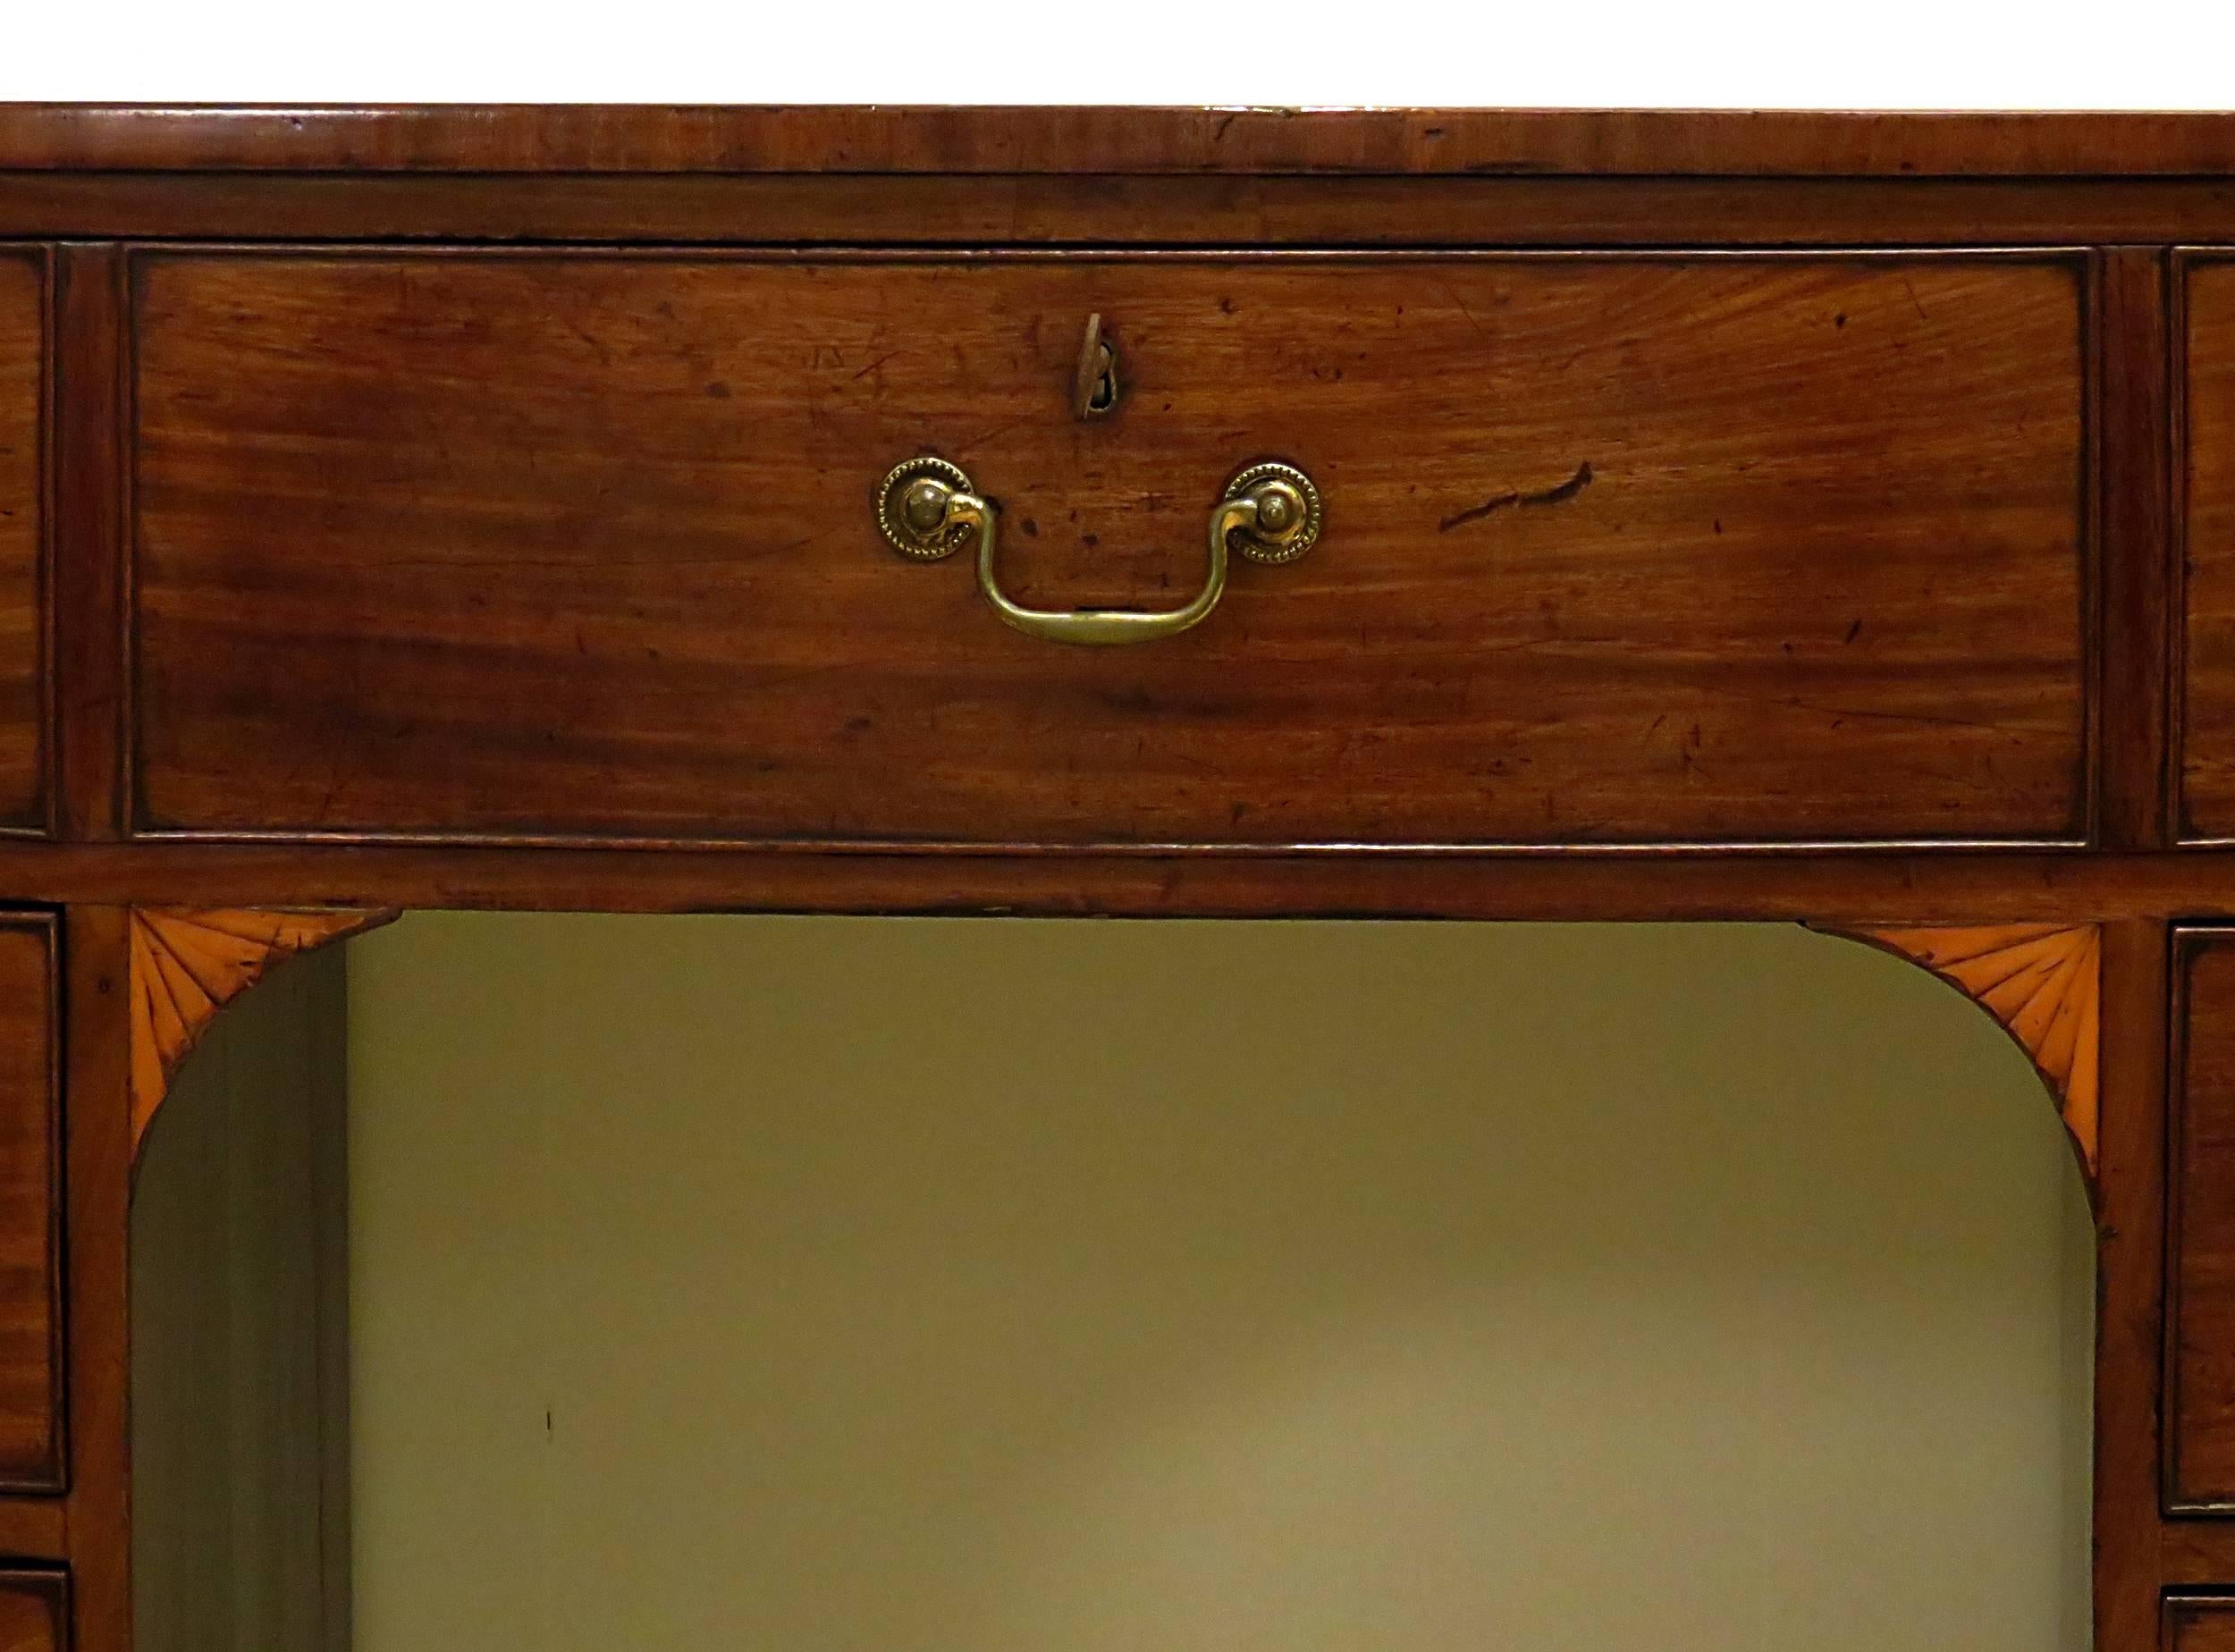 A very handsome and well-proportioned Georgian small sideboard or brandy board made in England late in the 18th century of well figured mahogany with satinwood spandrels and Chippendale swans neck pulls. From an old East Coast collection formed over